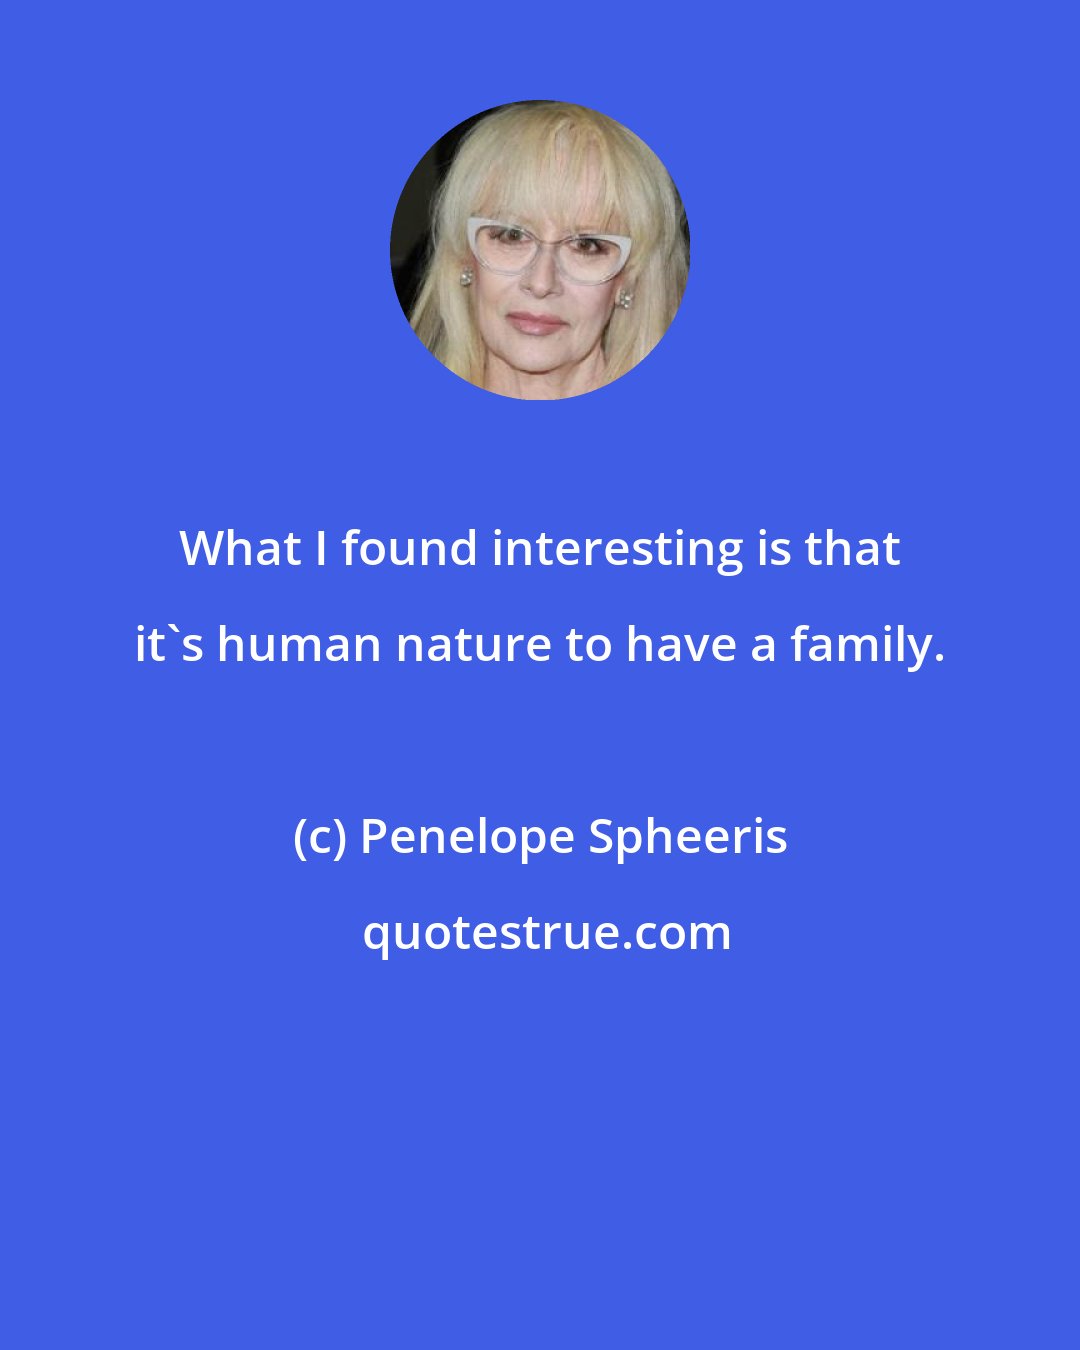 Penelope Spheeris: What I found interesting is that it's human nature to have a family.